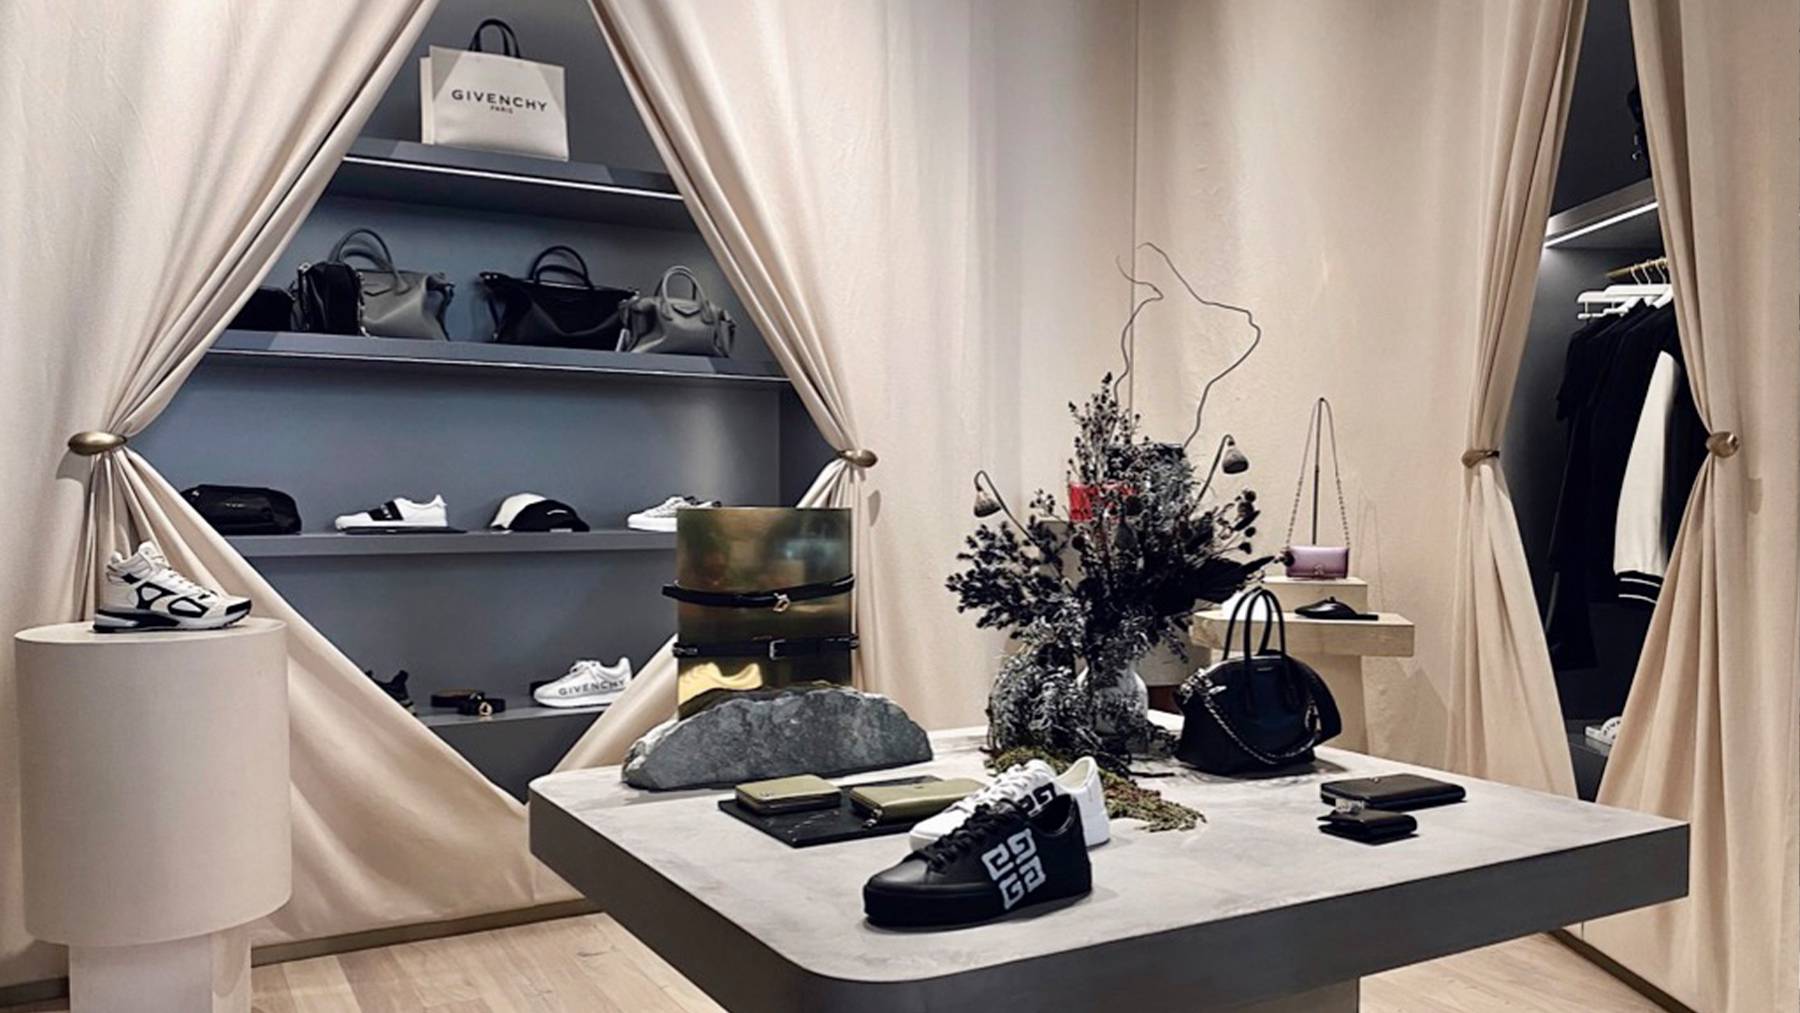 Inside the Faradays store, products sit on a stone table in the centre of a white draped room. Shelves with more products including bags, shoes and other accessories sit at the back behind the table.